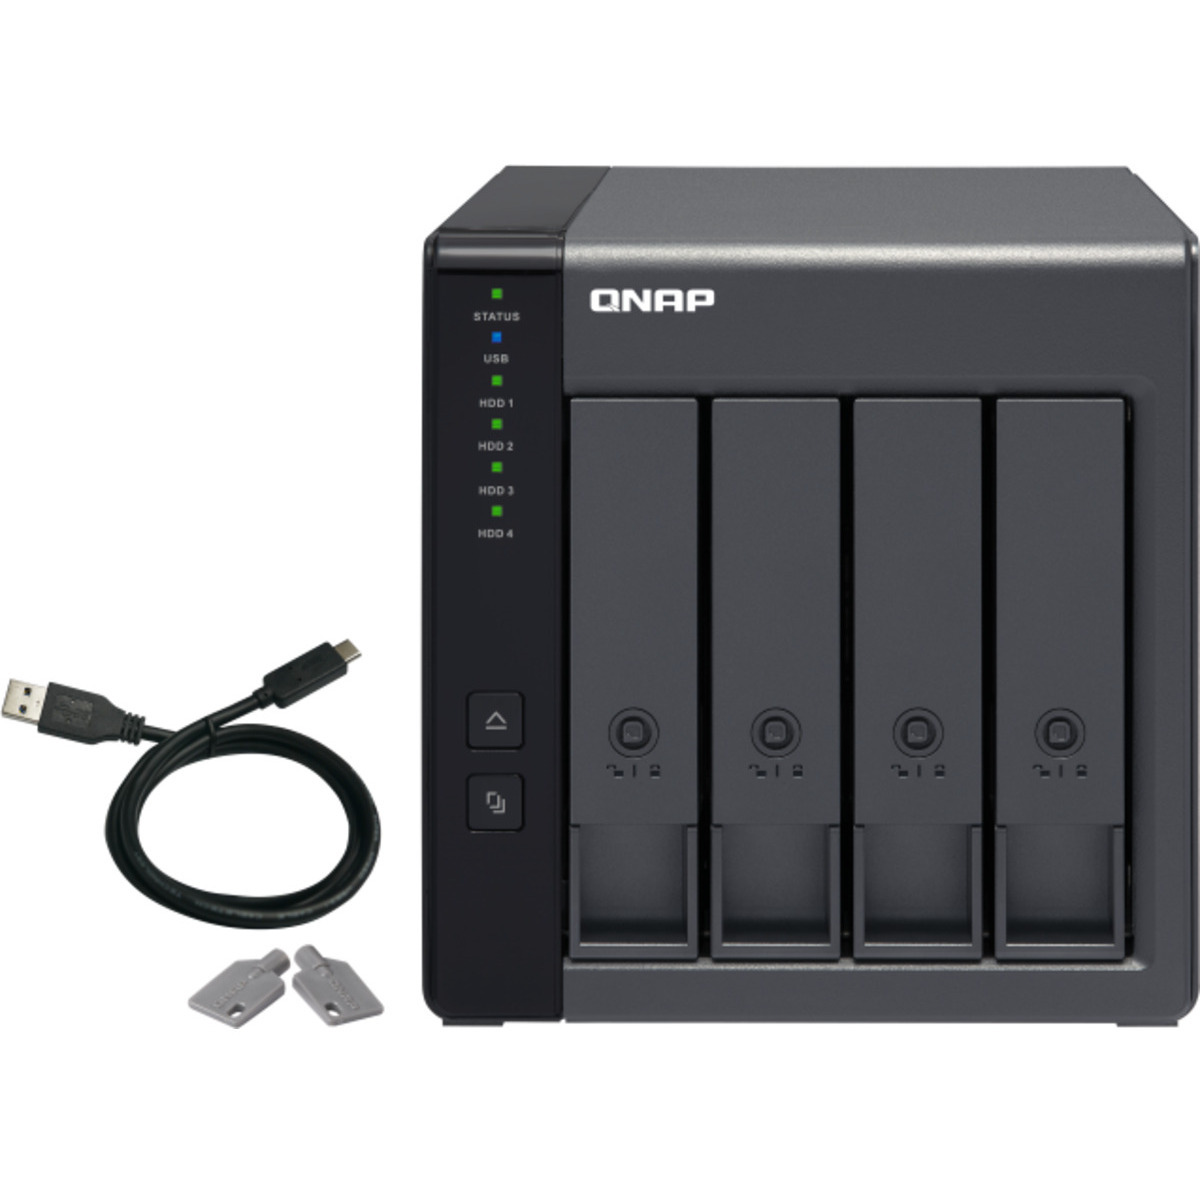 buy $533 QNAP TR-004 External Expansion Drive 8tb Desktop Expansion Enclosure 4x2000gb Seagate BarraCuda ST2000DM008 3.5 7200rpm SATA 6Gb/s HDD CONSUMER Class Drives Installed - Burn-In Tested - ON SALE - nas headquarters buy network attached storage server device das new raid-5 free shipping usa christmas new year holiday sale TR-004 External Expansion Drive